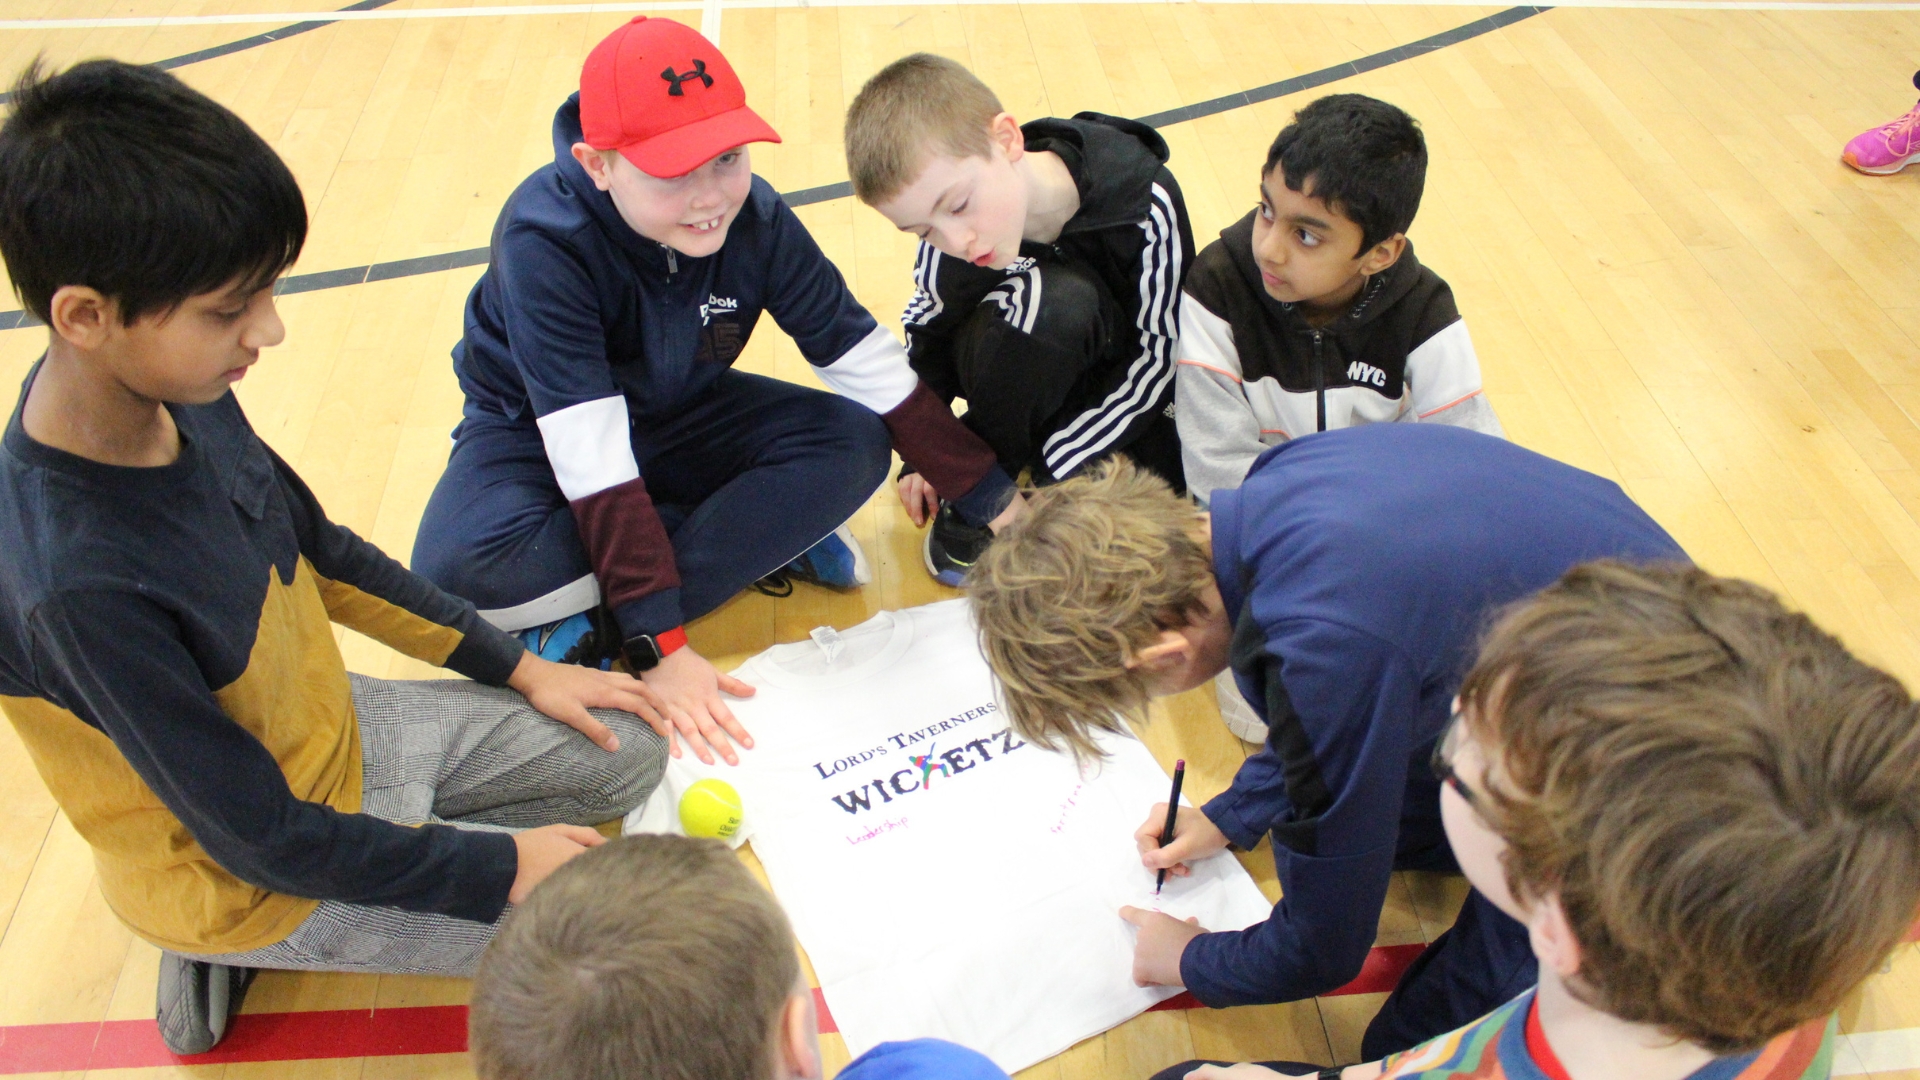 a group of boys designing a Wicketz t-shirt with their team values